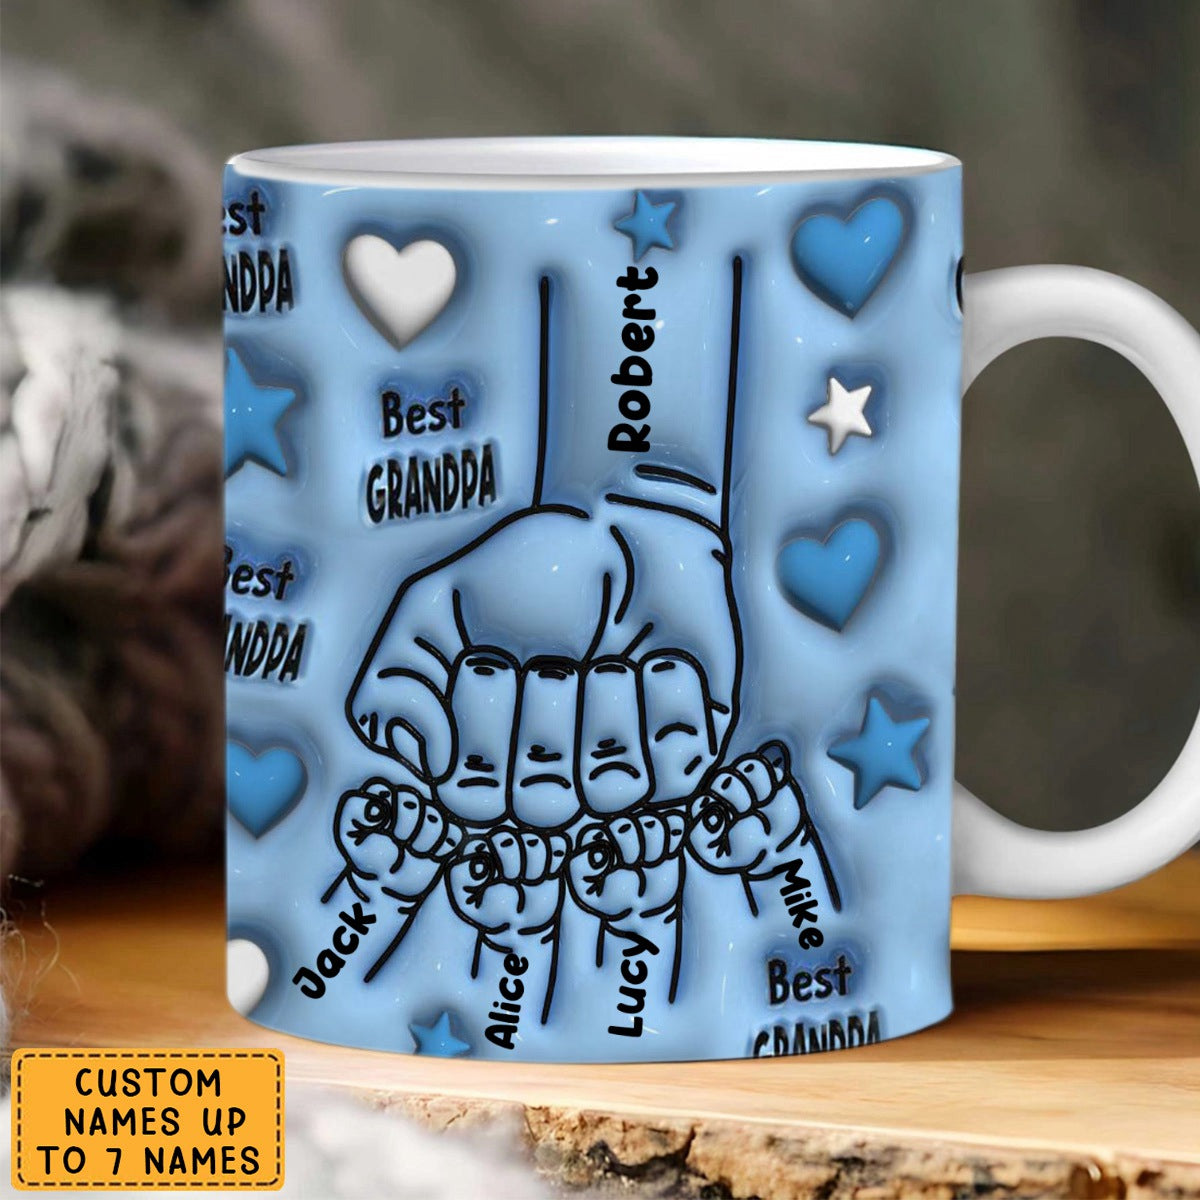 Best Dad/Grandpa - Personalized 3D Inflated Effect Mug - Gift For Cat Dad/Grandpa